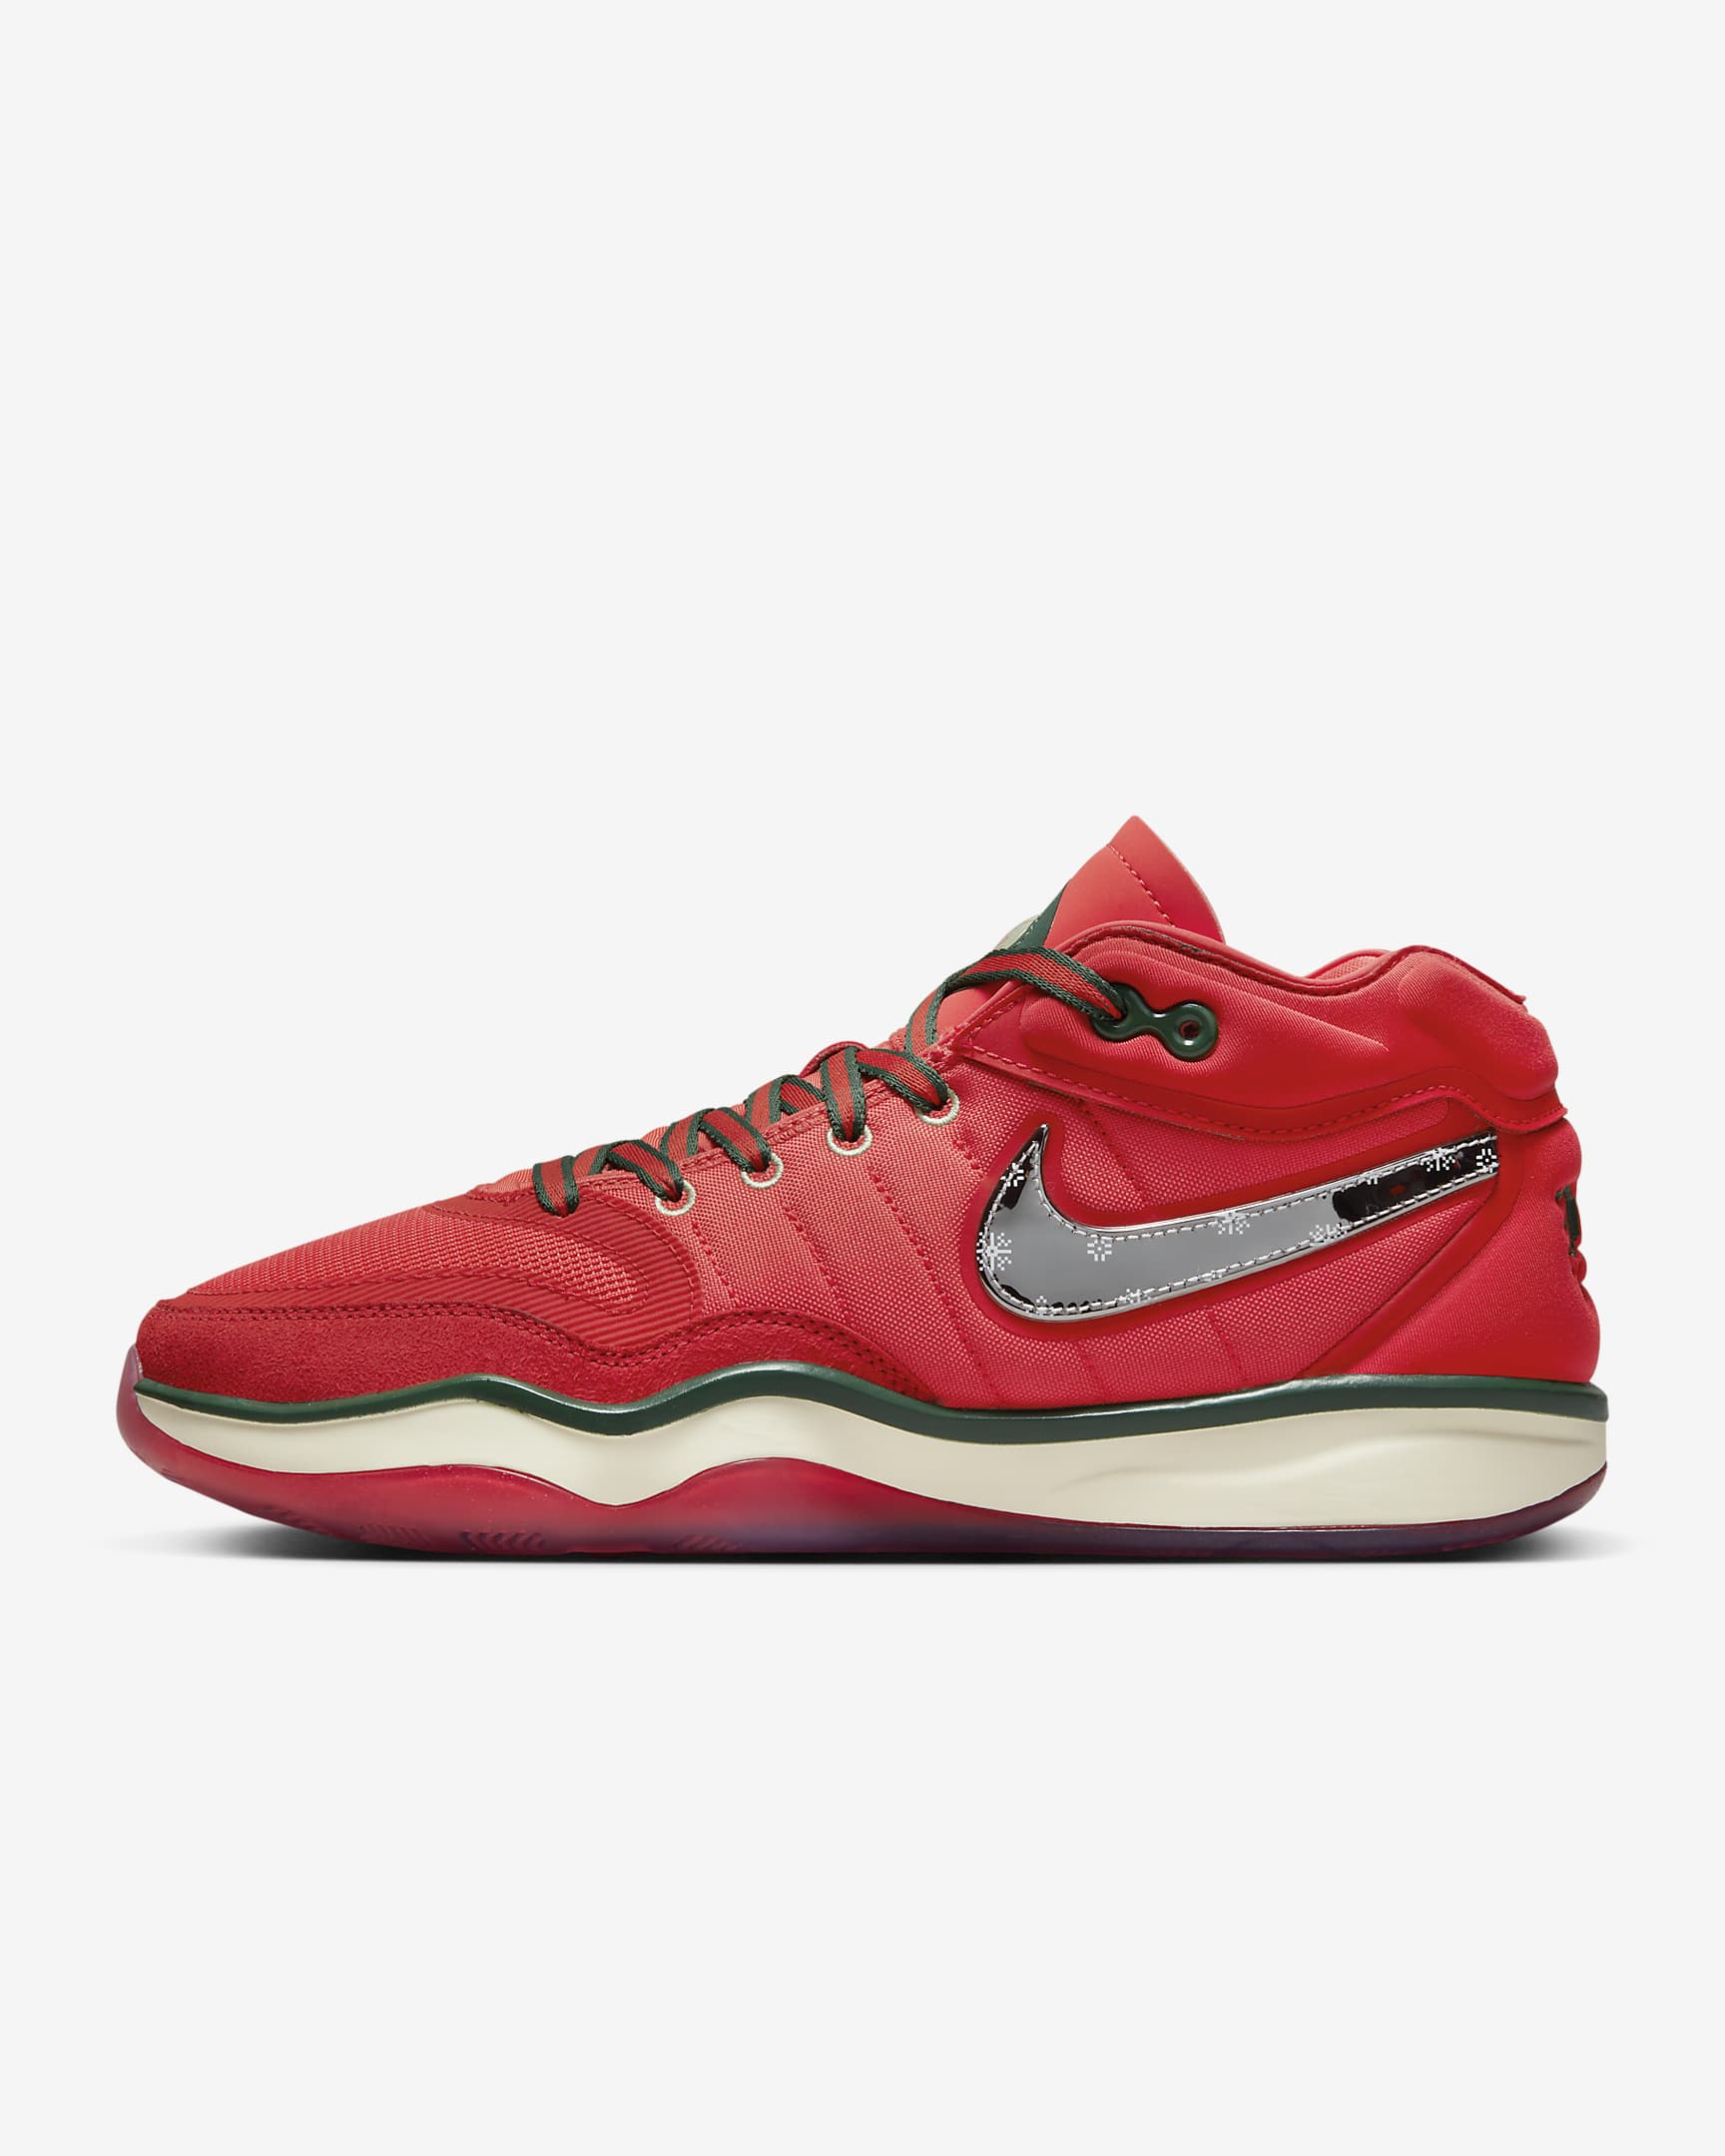 Nike G.T. Hustle 2 Basketball Shoes - Track Red/Mystic Red/Fir/Metallic Silver